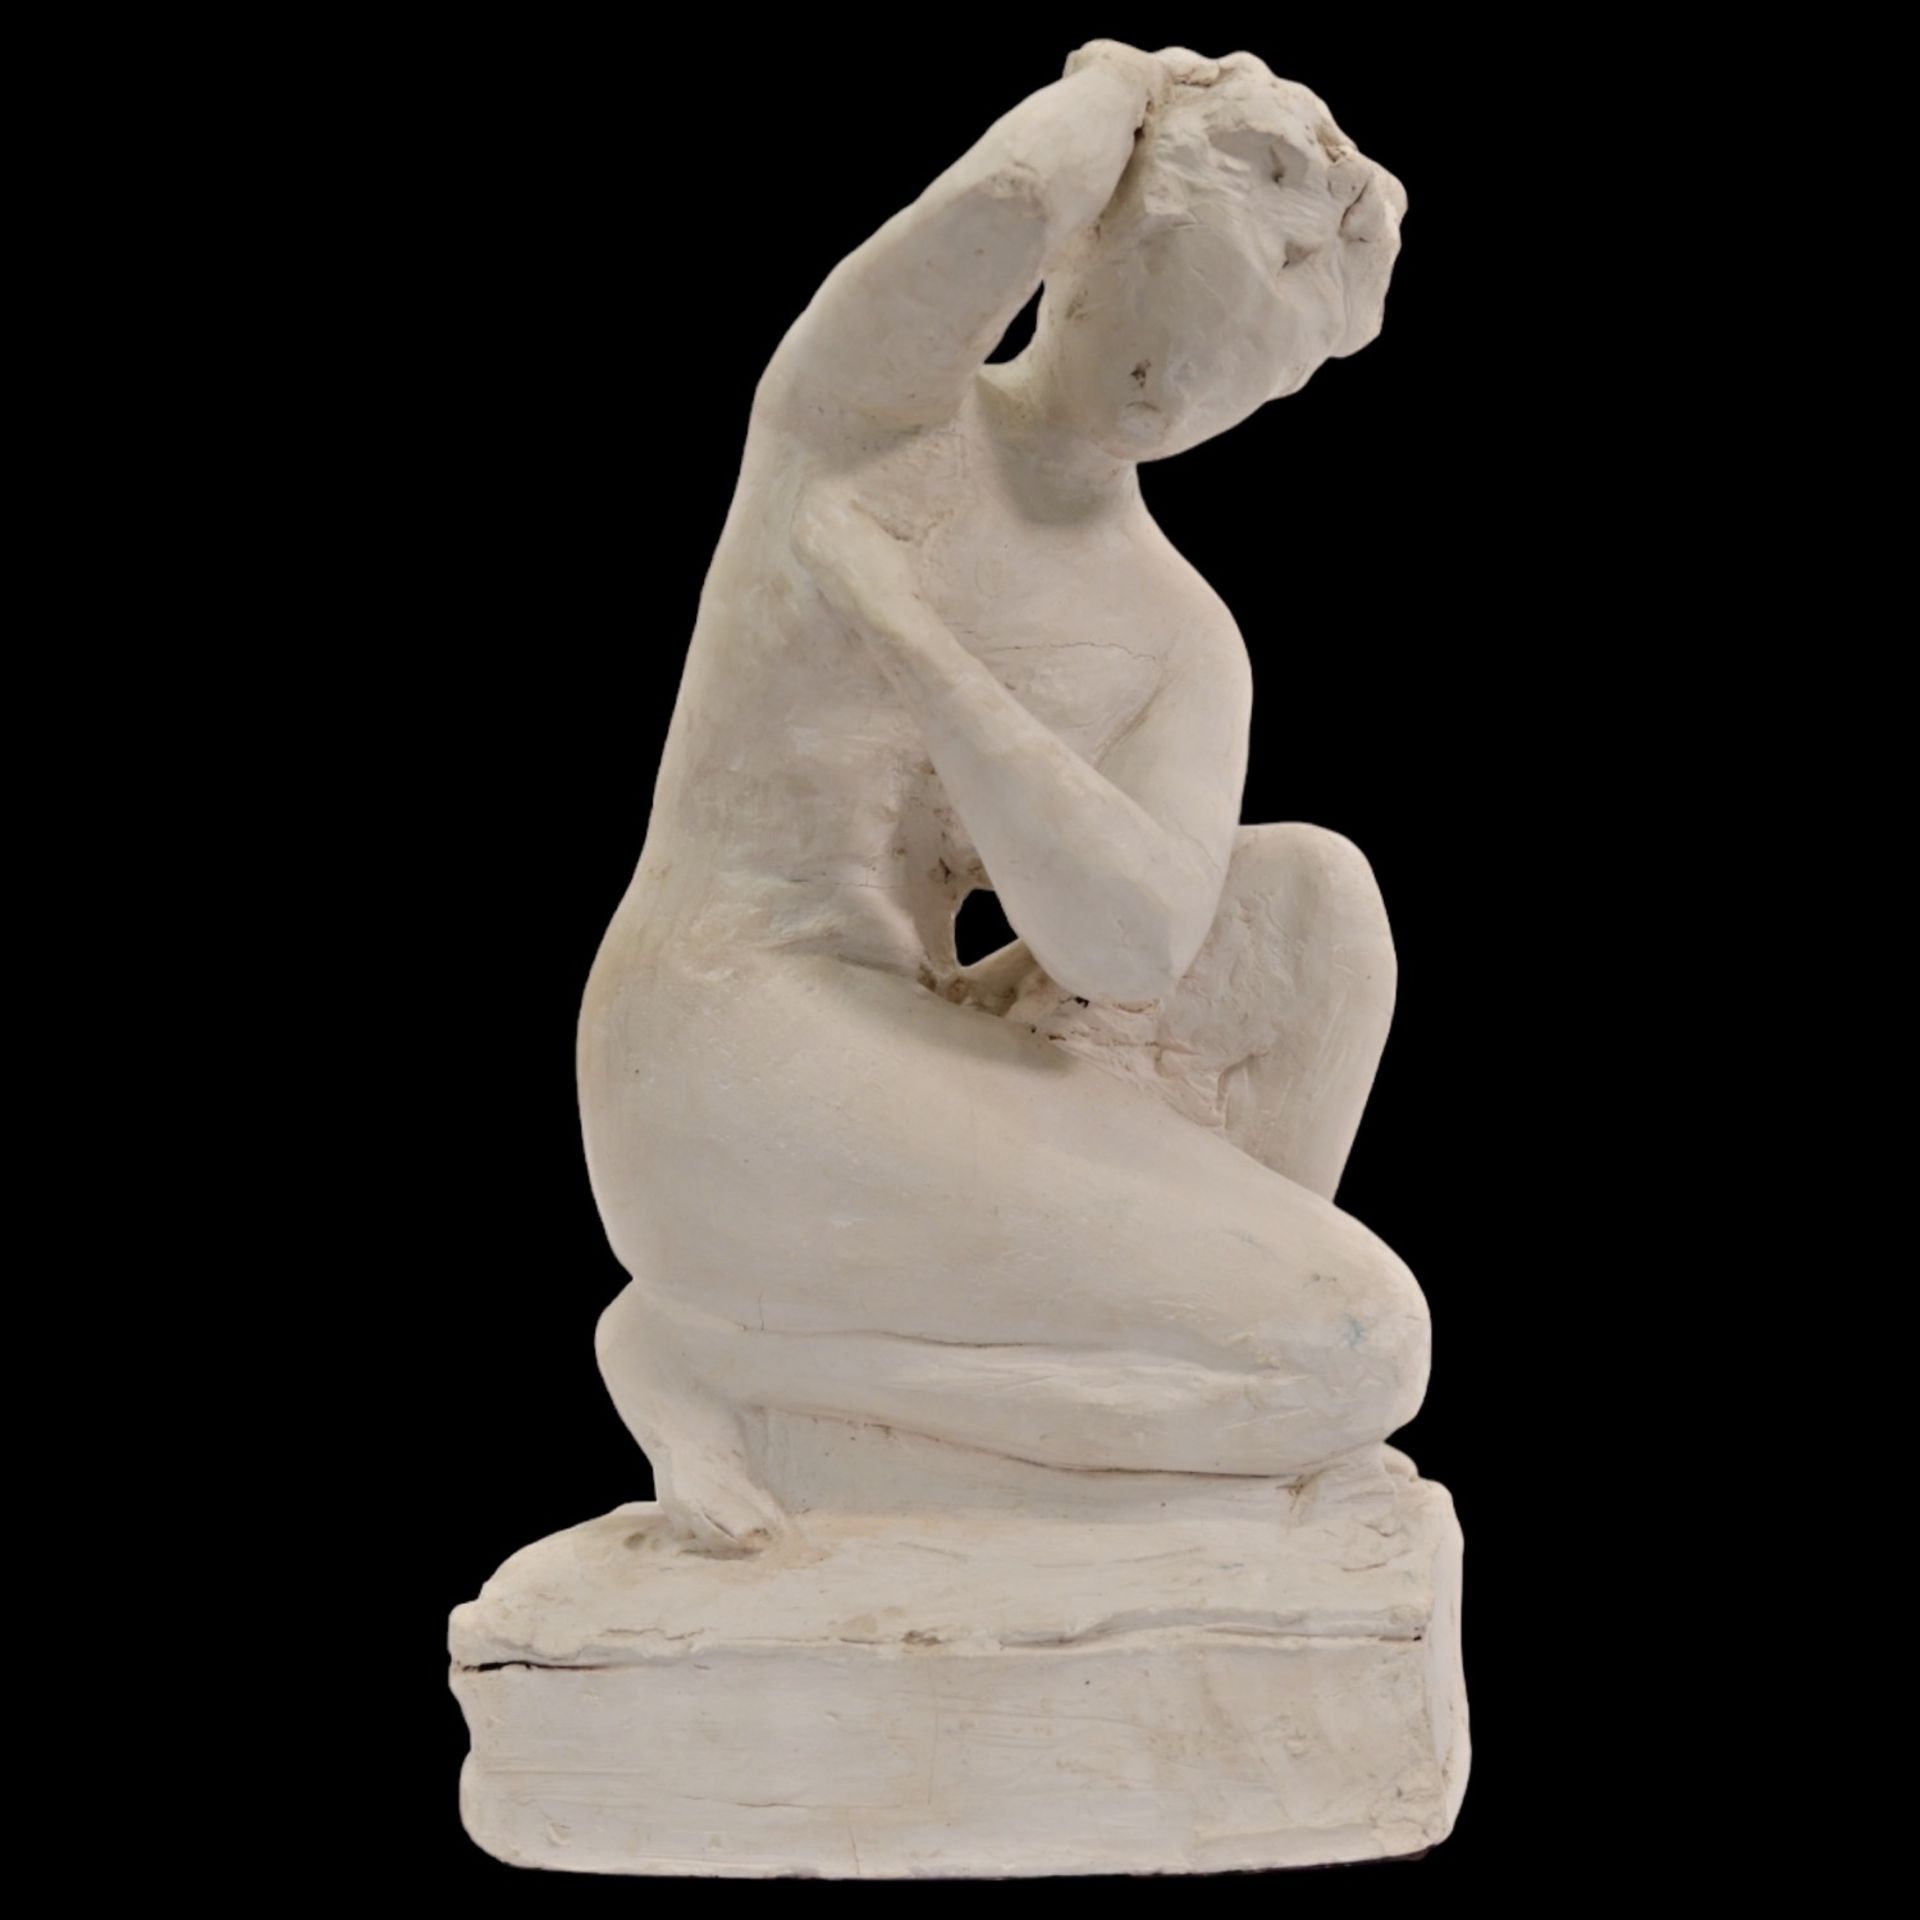 Terracotta sculpture "Young Woman", unsigned, France, 19th century. Collectibles and home decor. - Image 6 of 8